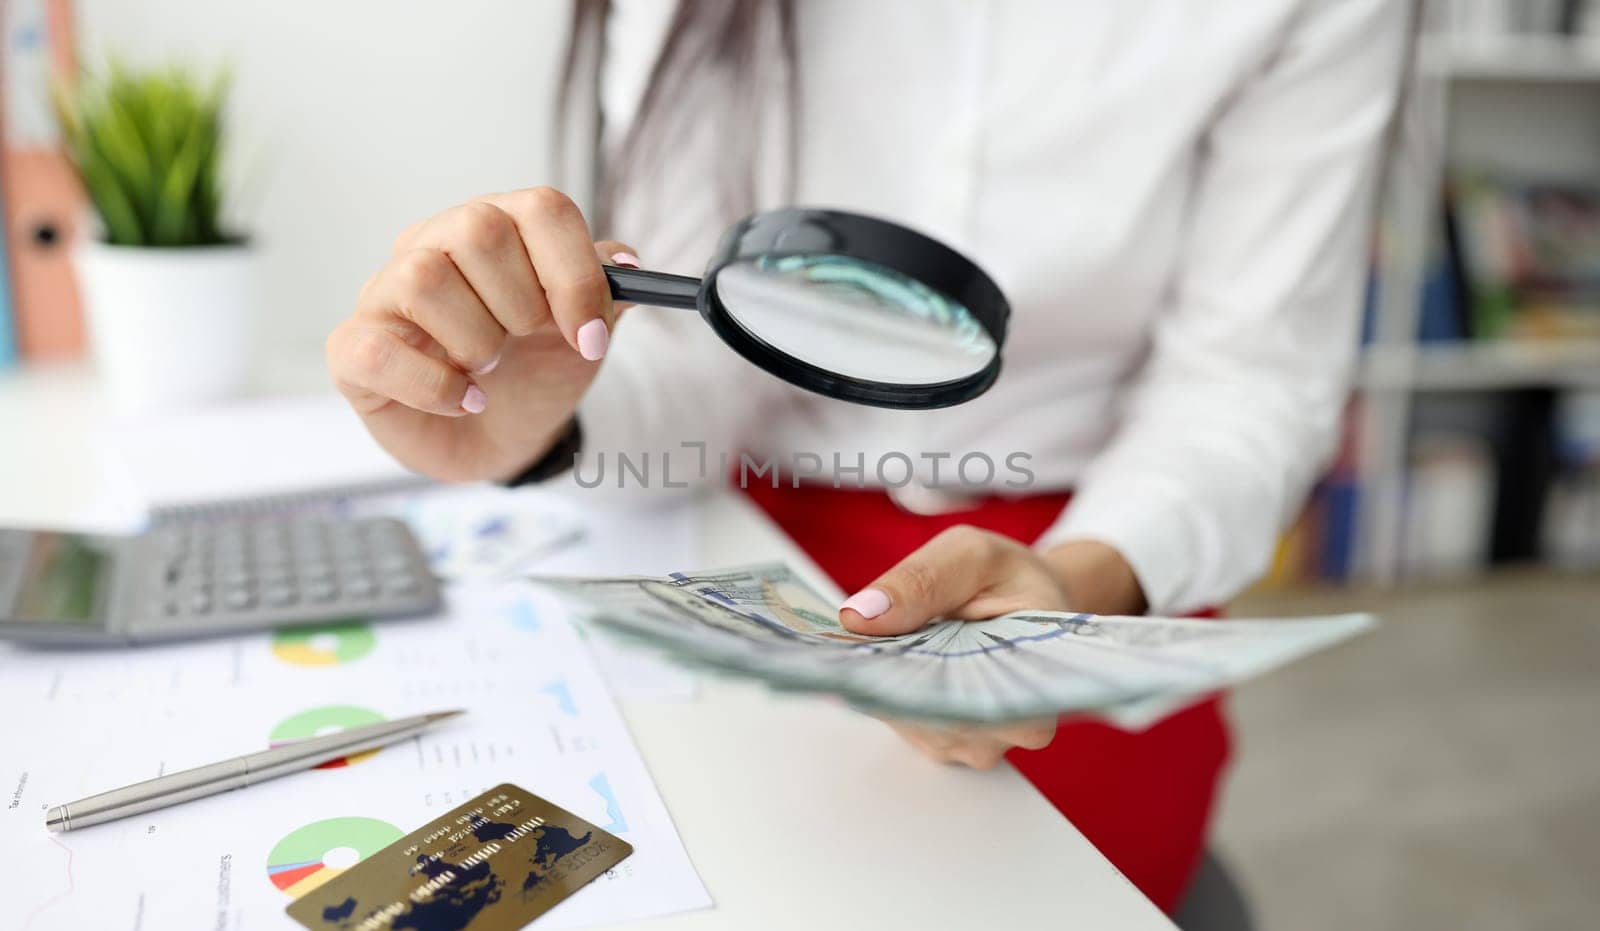 Woman check currency for authenticity. Female hand hold magnifying glass and lot of money. On white table lies gray calculator, metal pen, bank card and document with diagram.